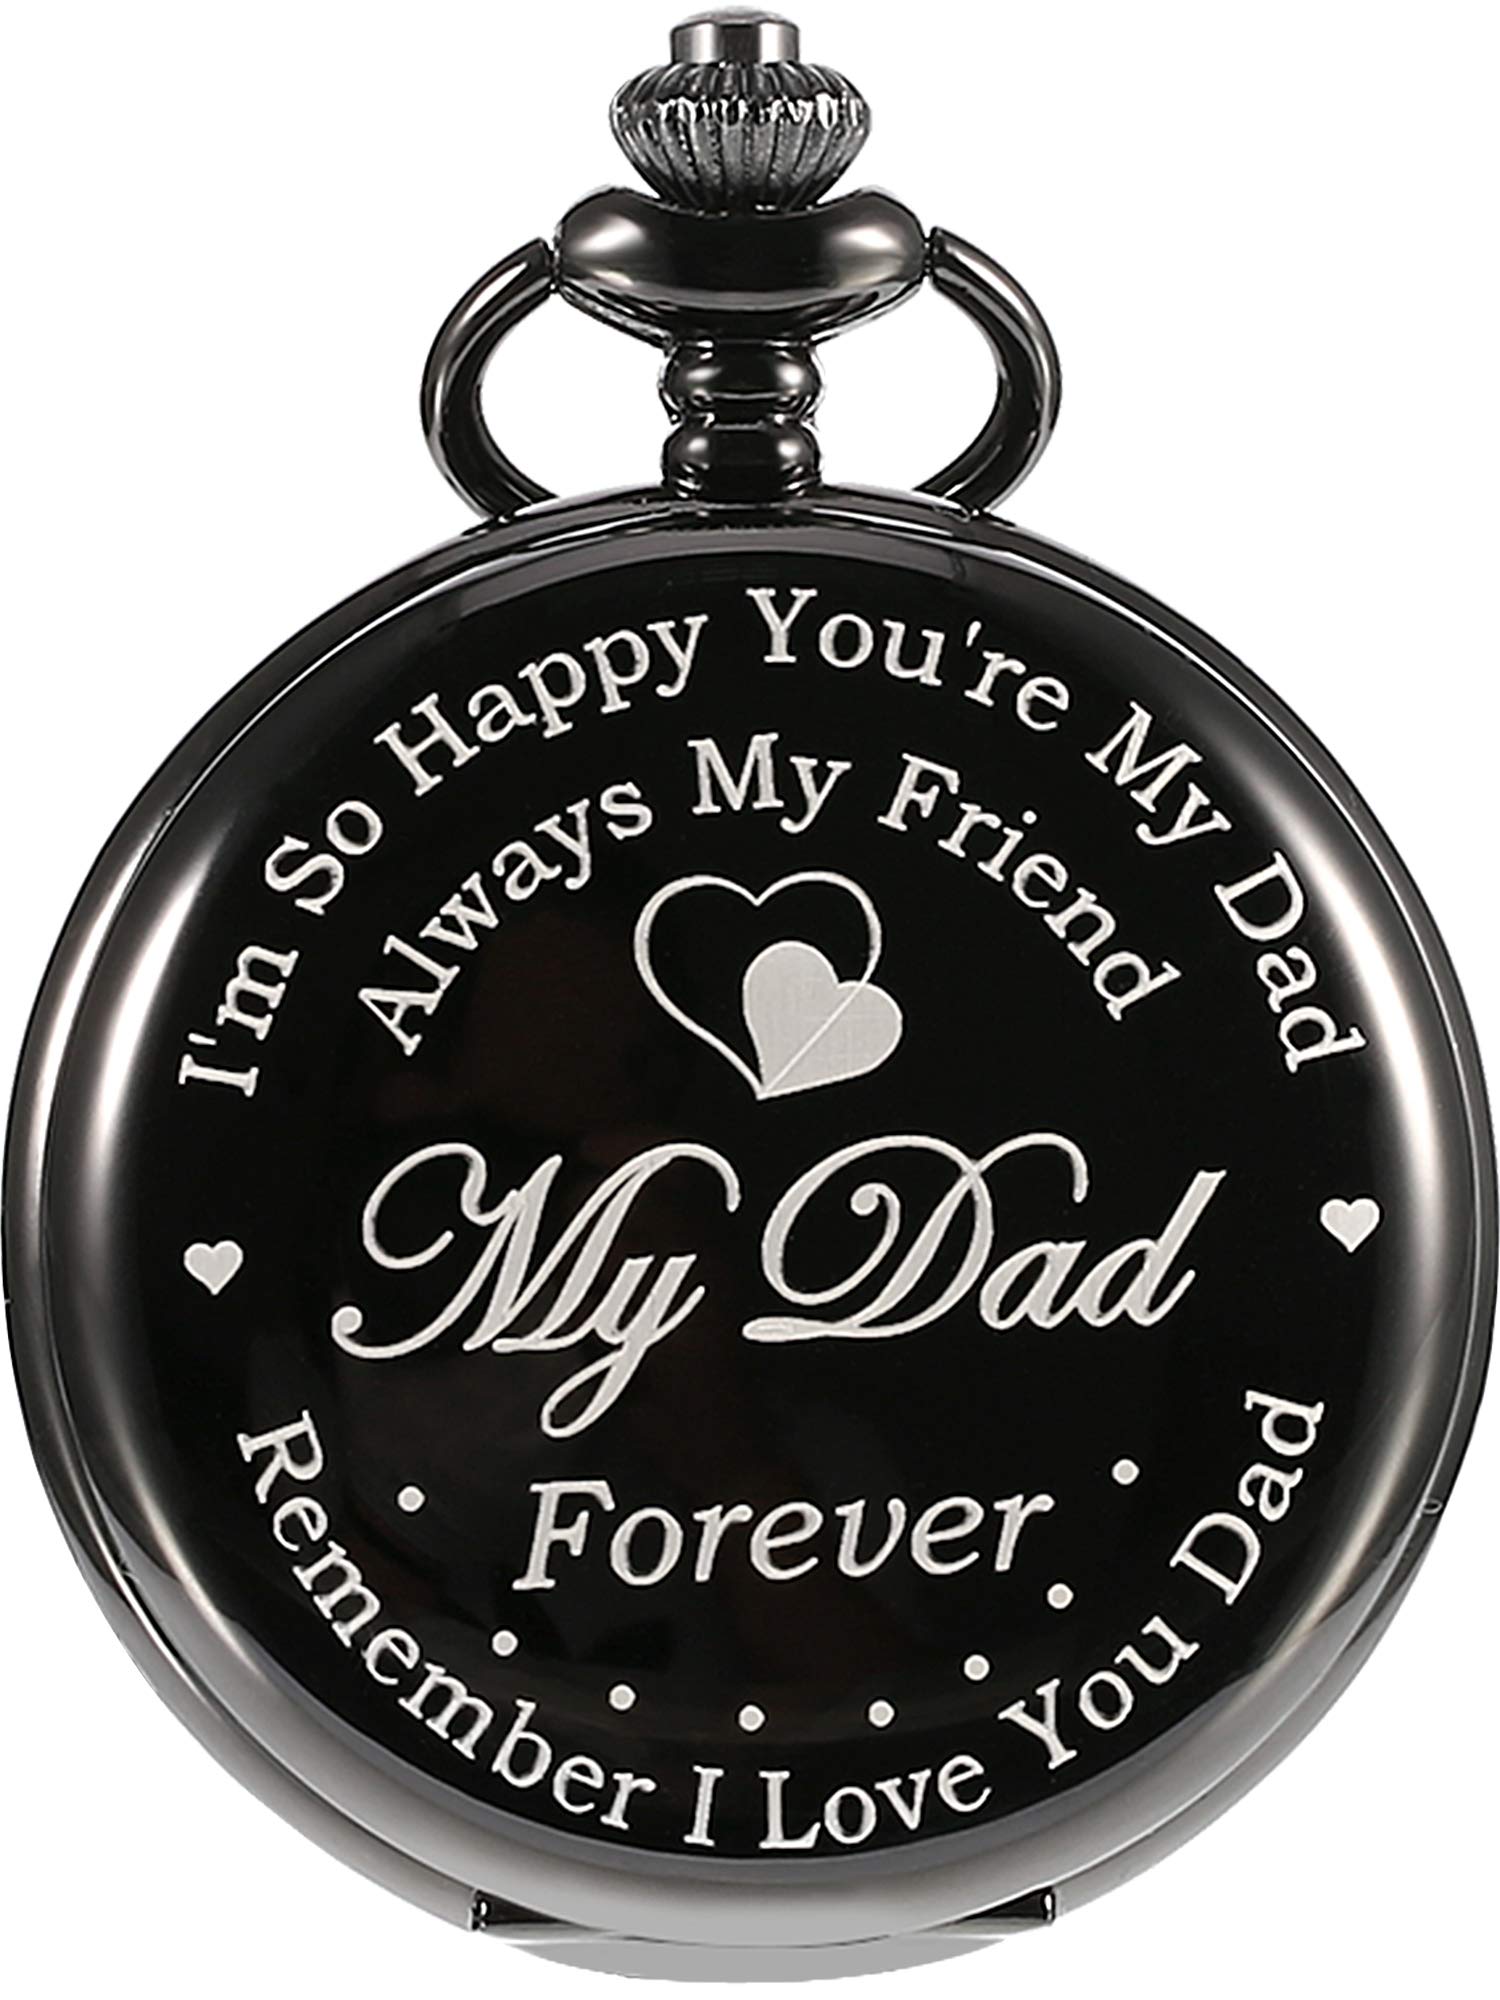 Hicarer Pocket Watch Engraved Presents for Dad Father with Delicate Box, Christmas Birthday Fathers Day Present from Daughter Son Kid